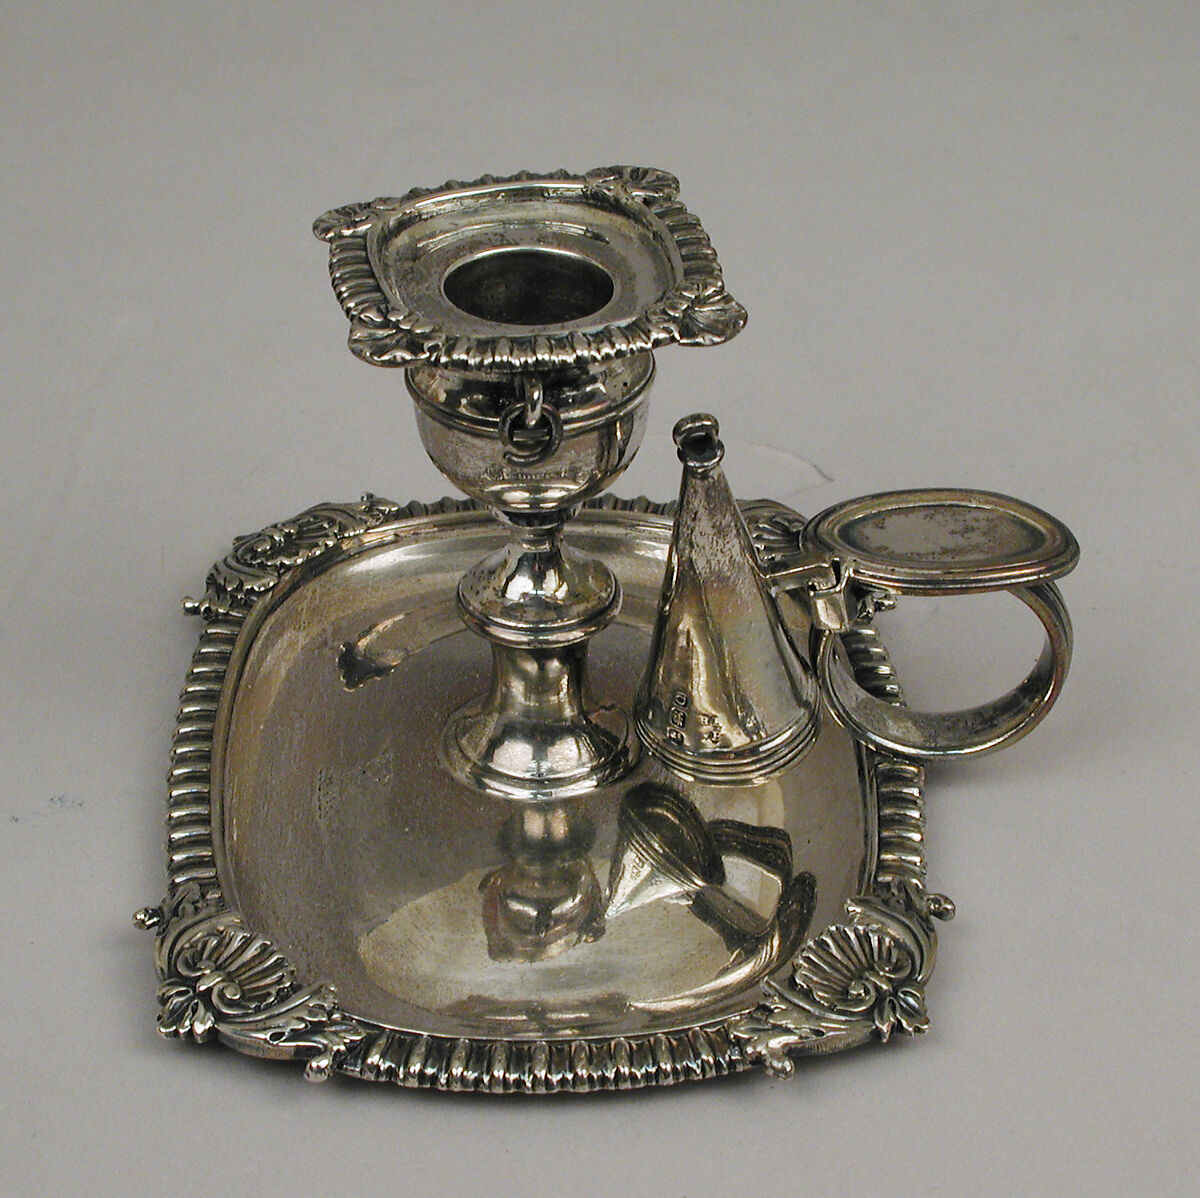 Chamber candlestick or taperstick, Rebecca Emes (active 1808–after 1825), Silver, British, London 